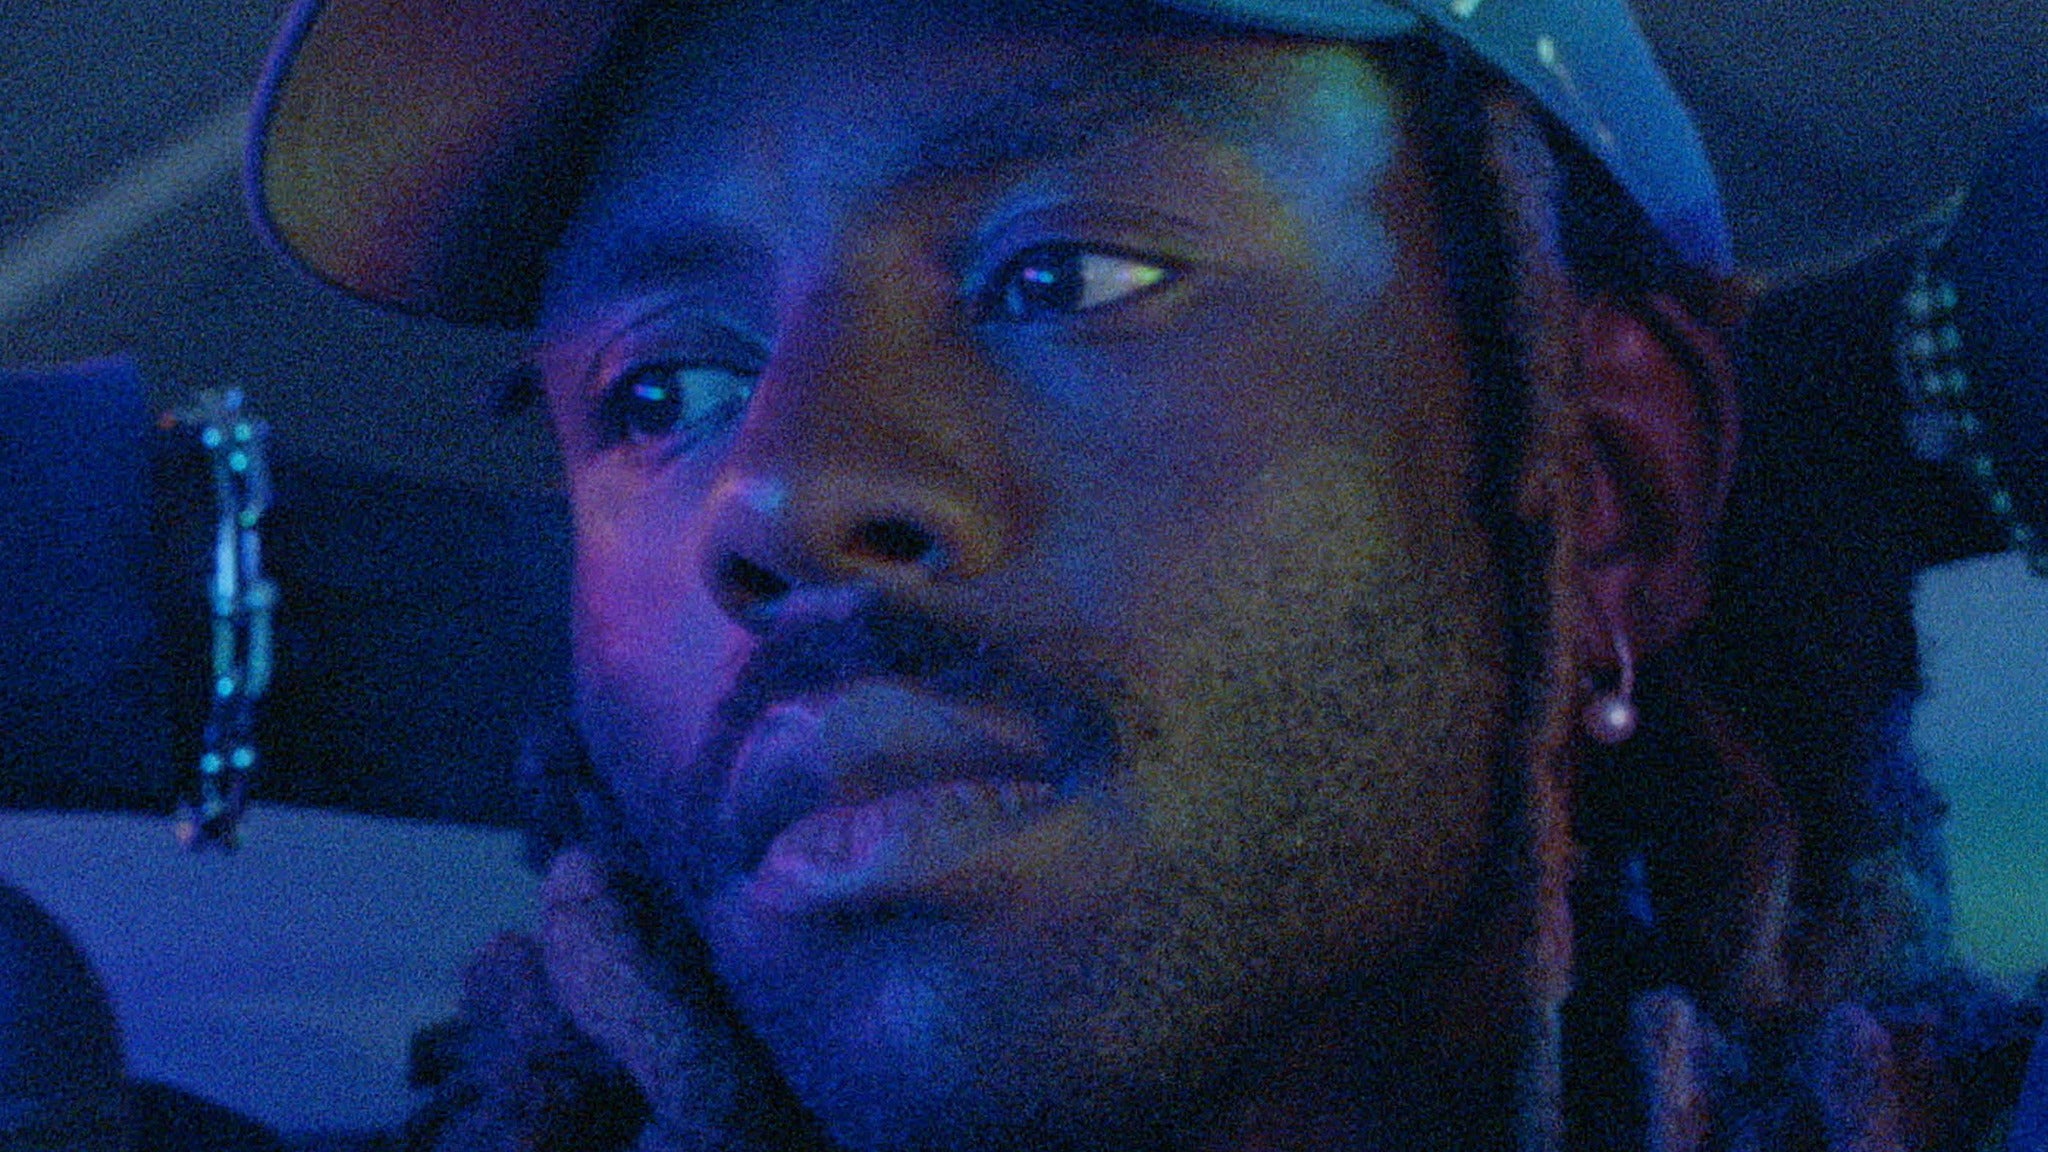 Swan House Presents: Blood Orange with Special Guest Tei Shi in New York promo photo for Blood Orange Artist presale offer code